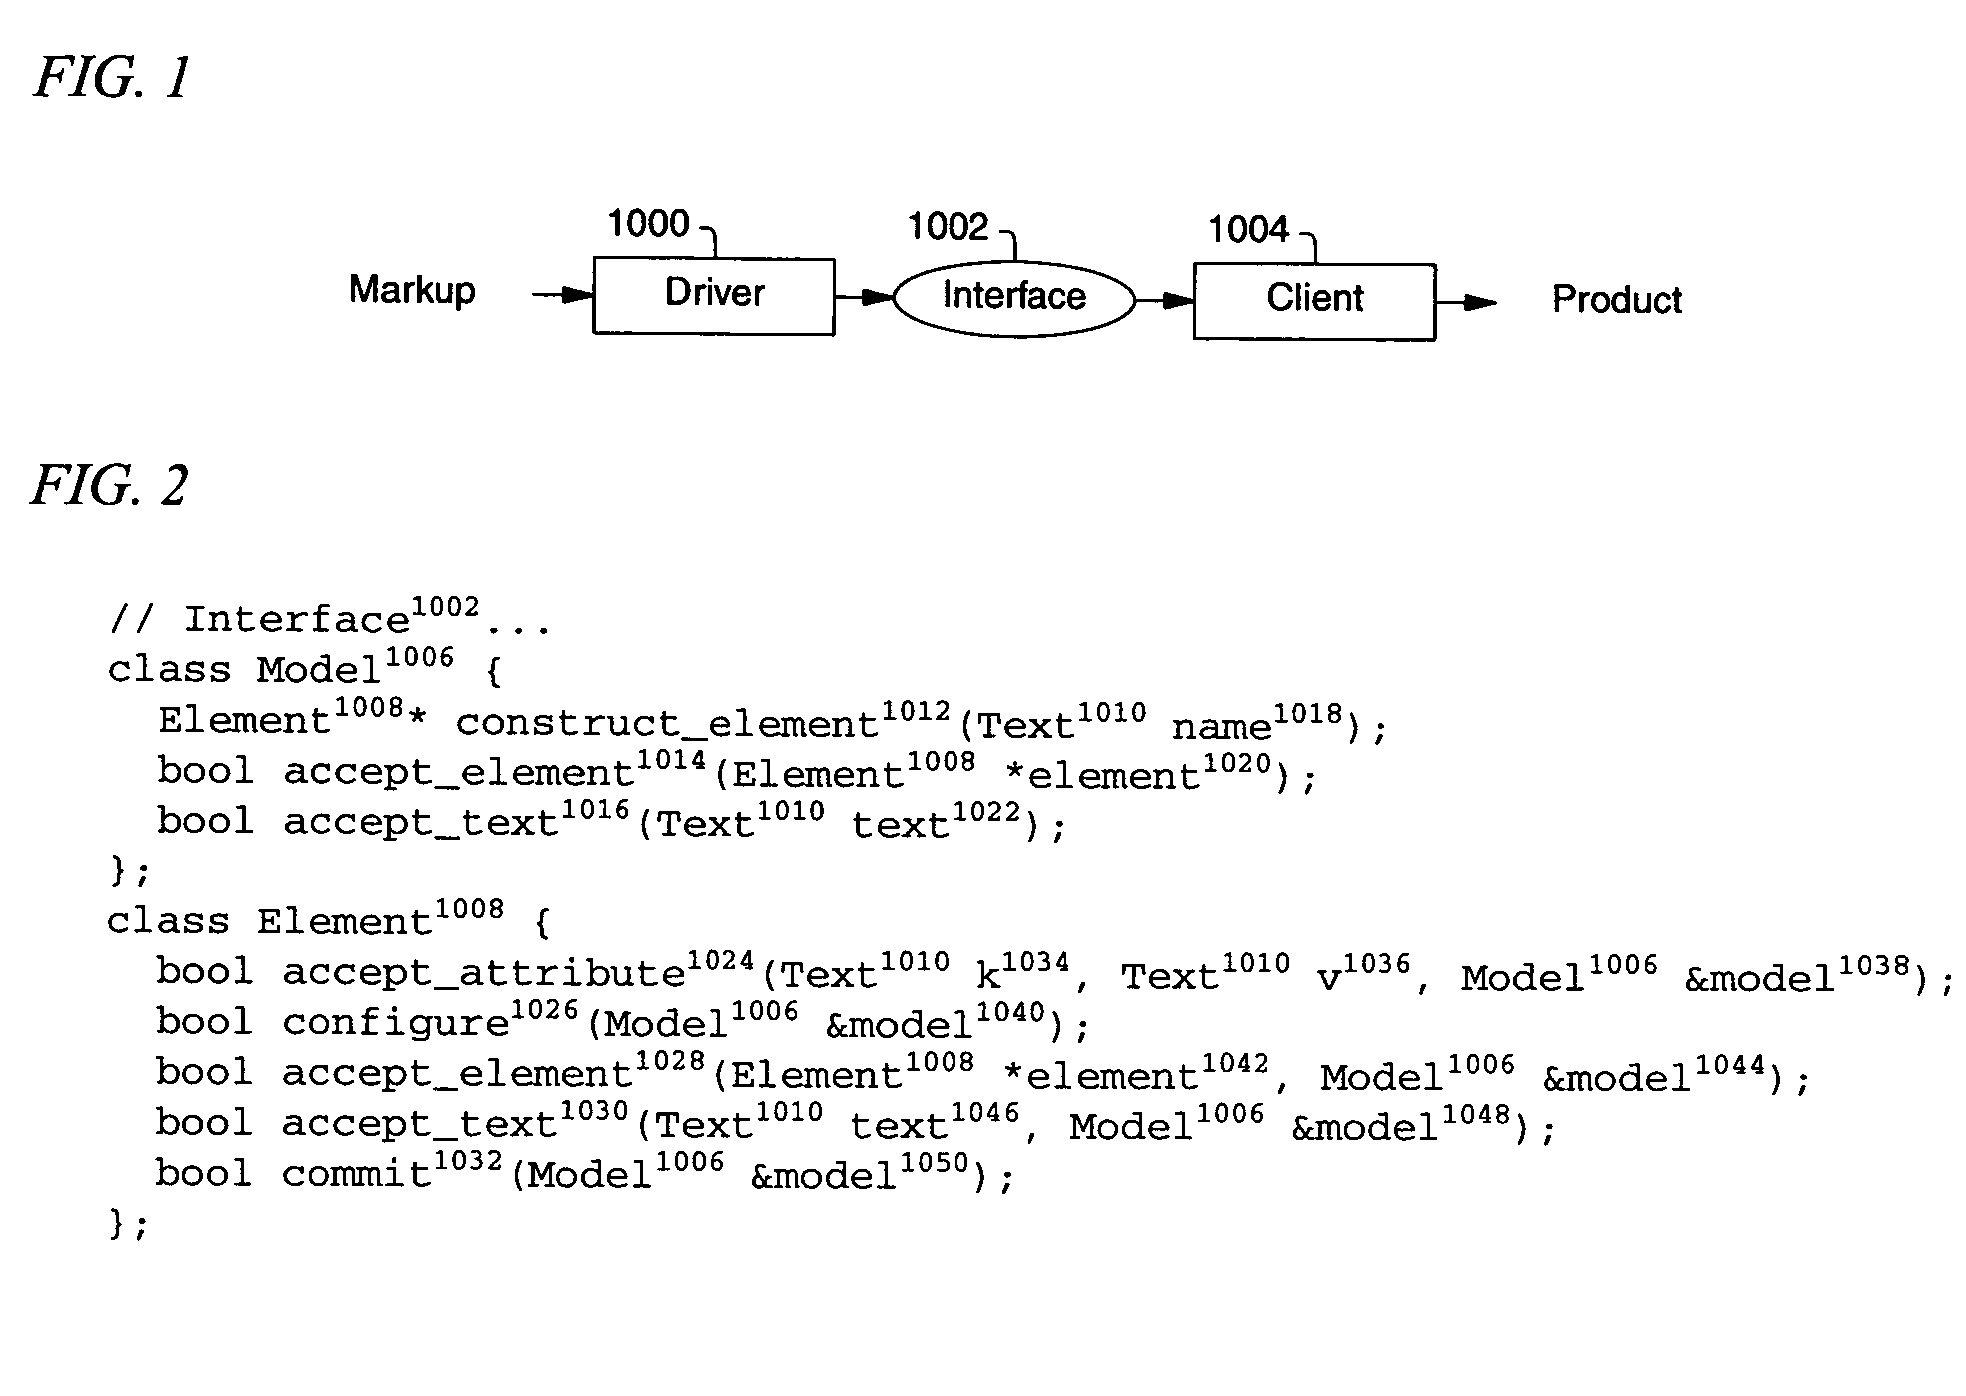 Object-oriented processing of markup